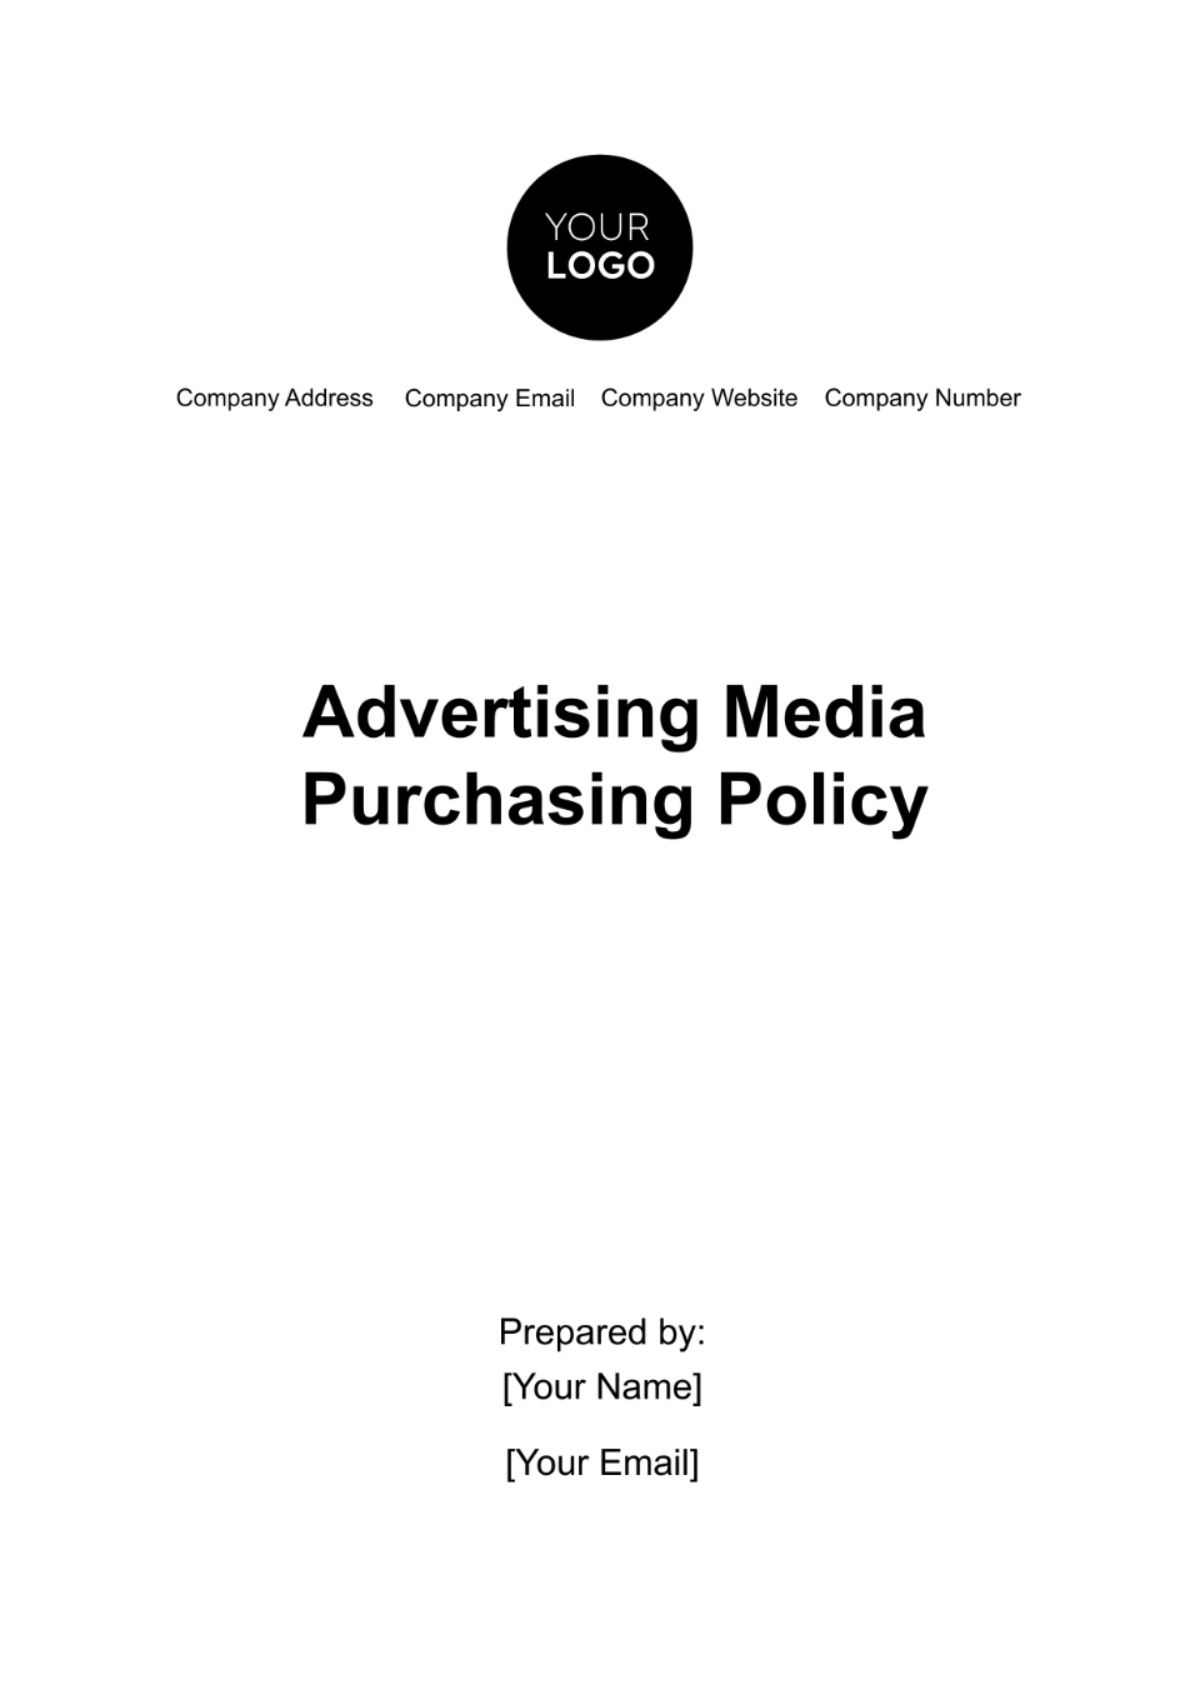 Advertising Media Purchasing Policy Document Template